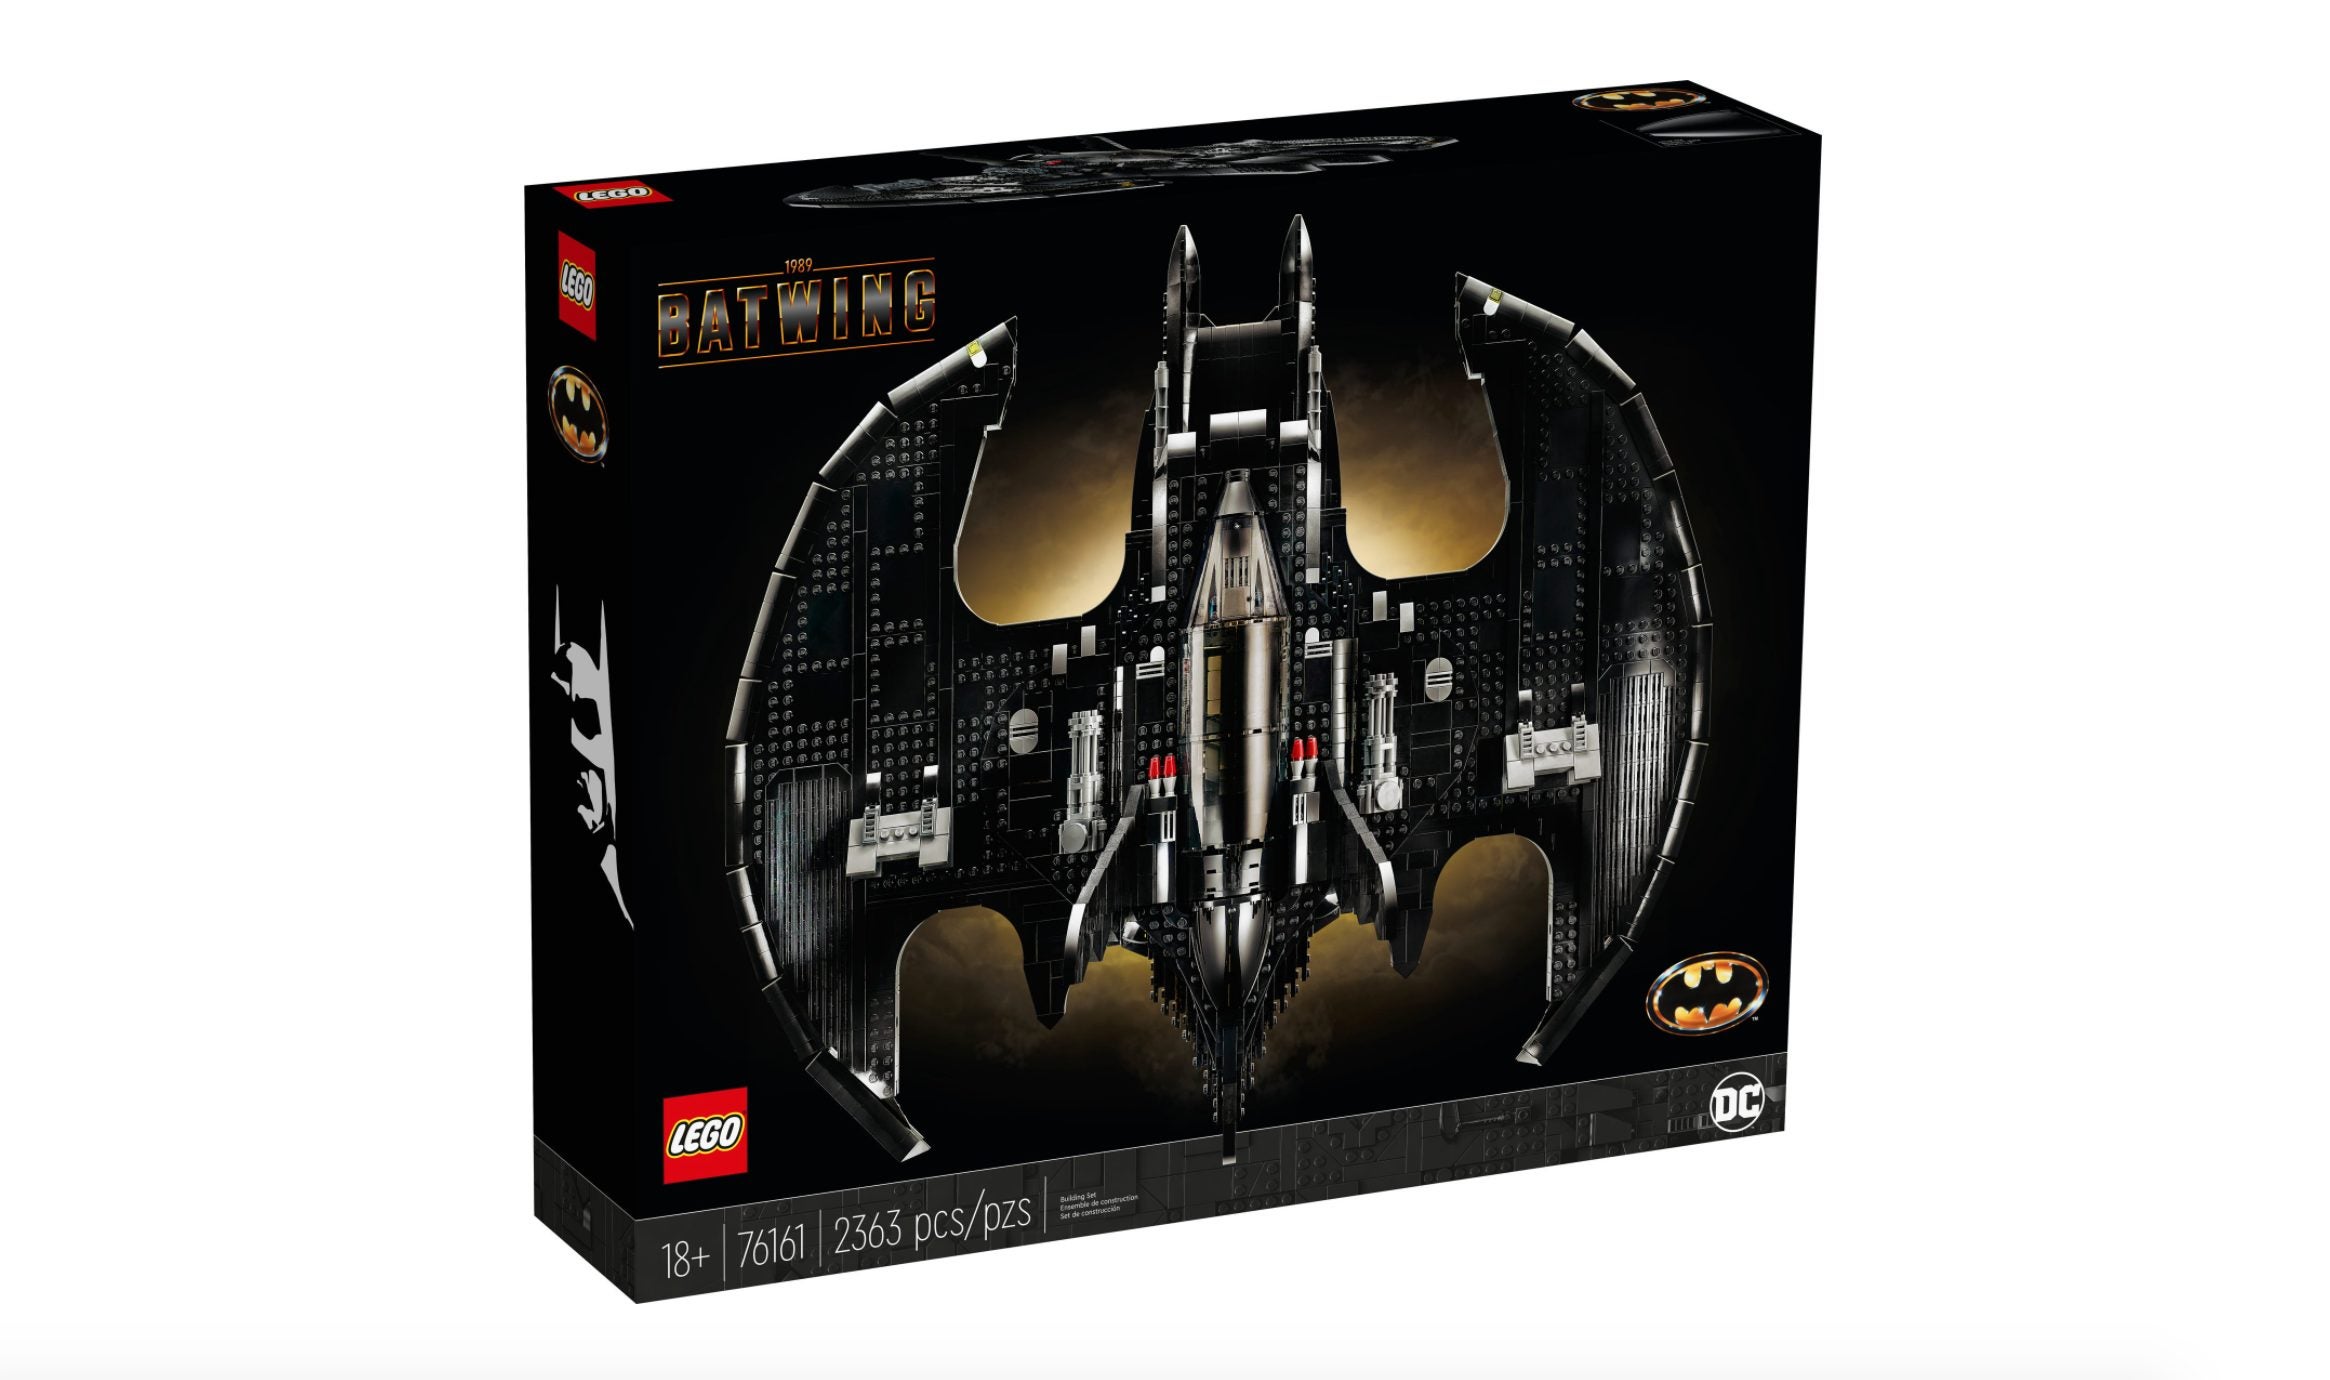 LEGO Reveals New 2,363 Piece Batwing Set Inspired From 1989s Batman Film -  